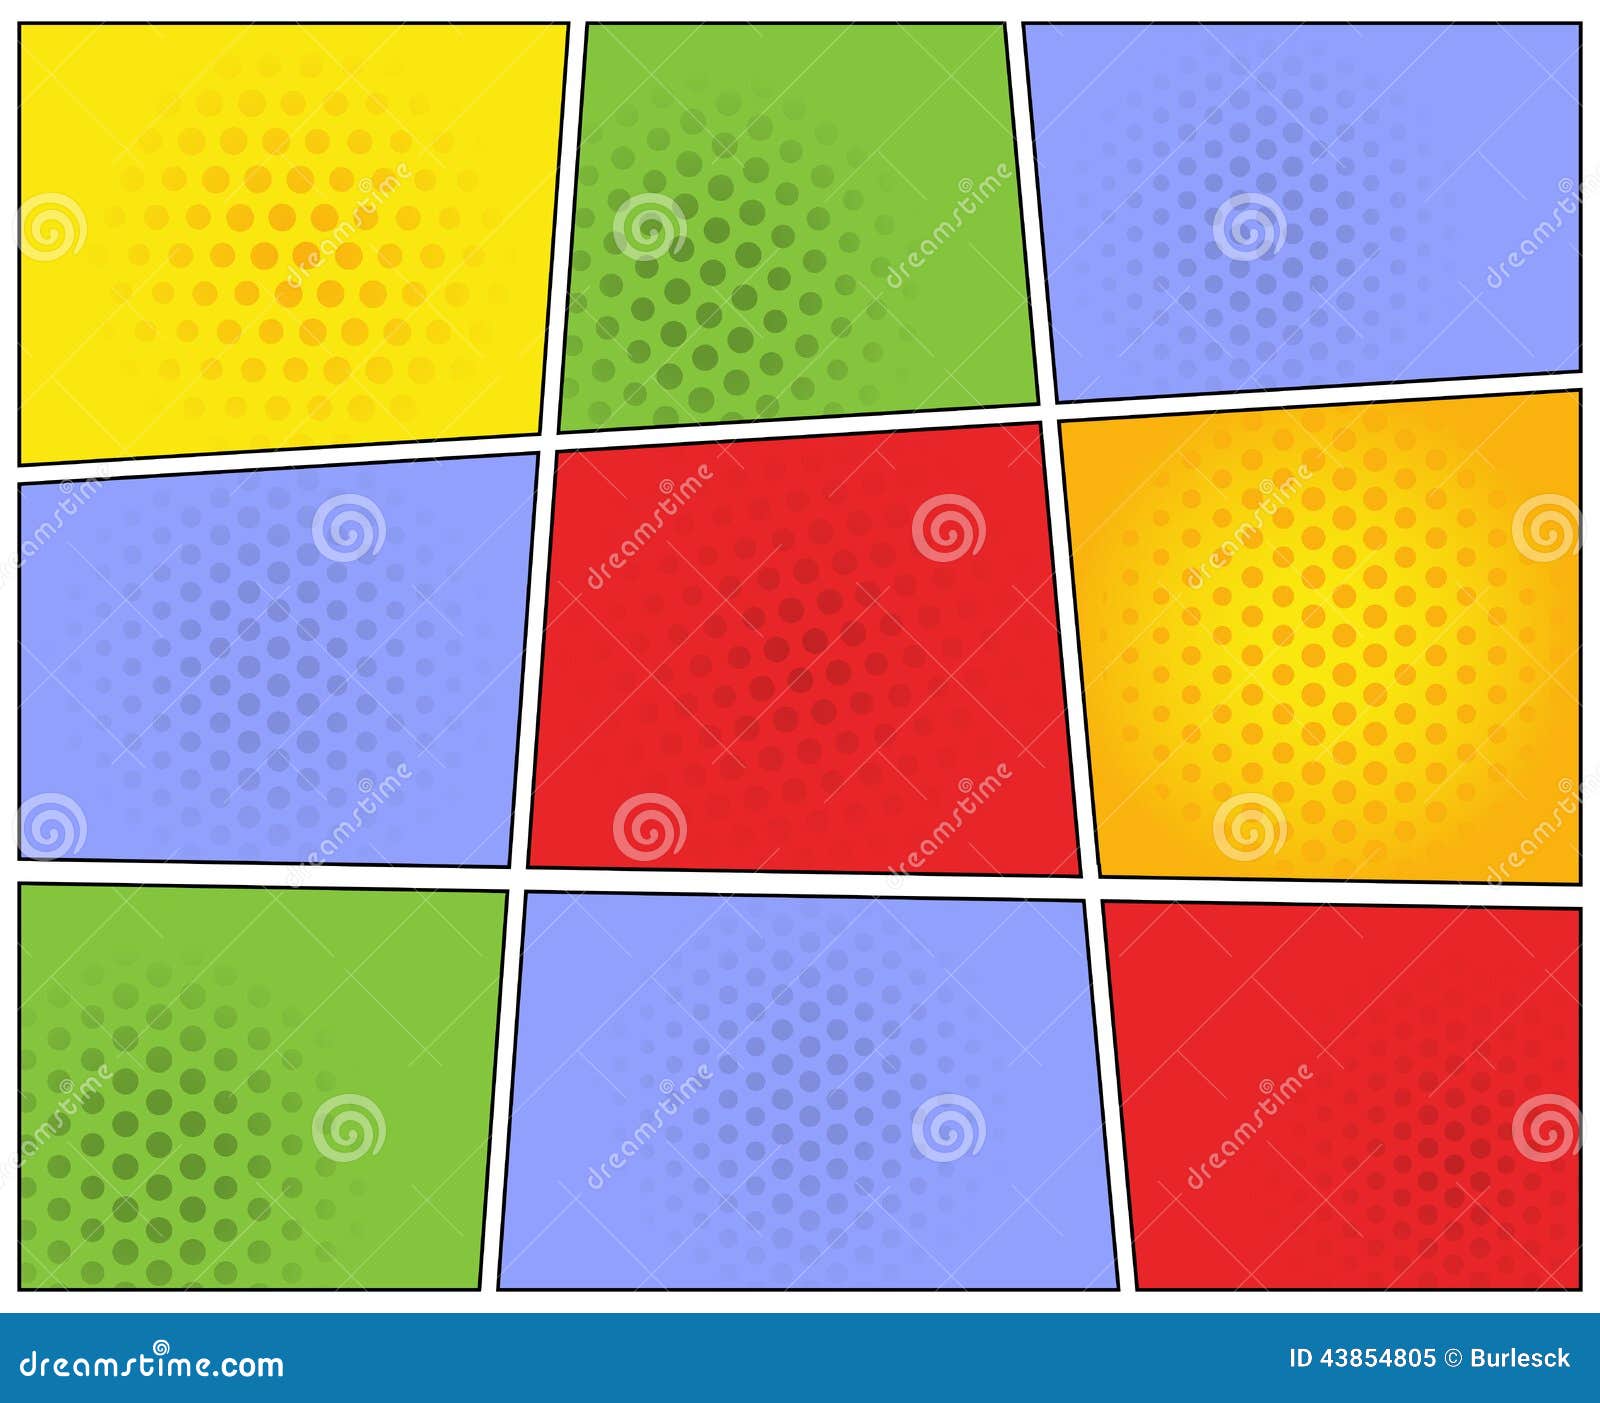 comic-book-page-layout-template-stock-vector-image-43854805